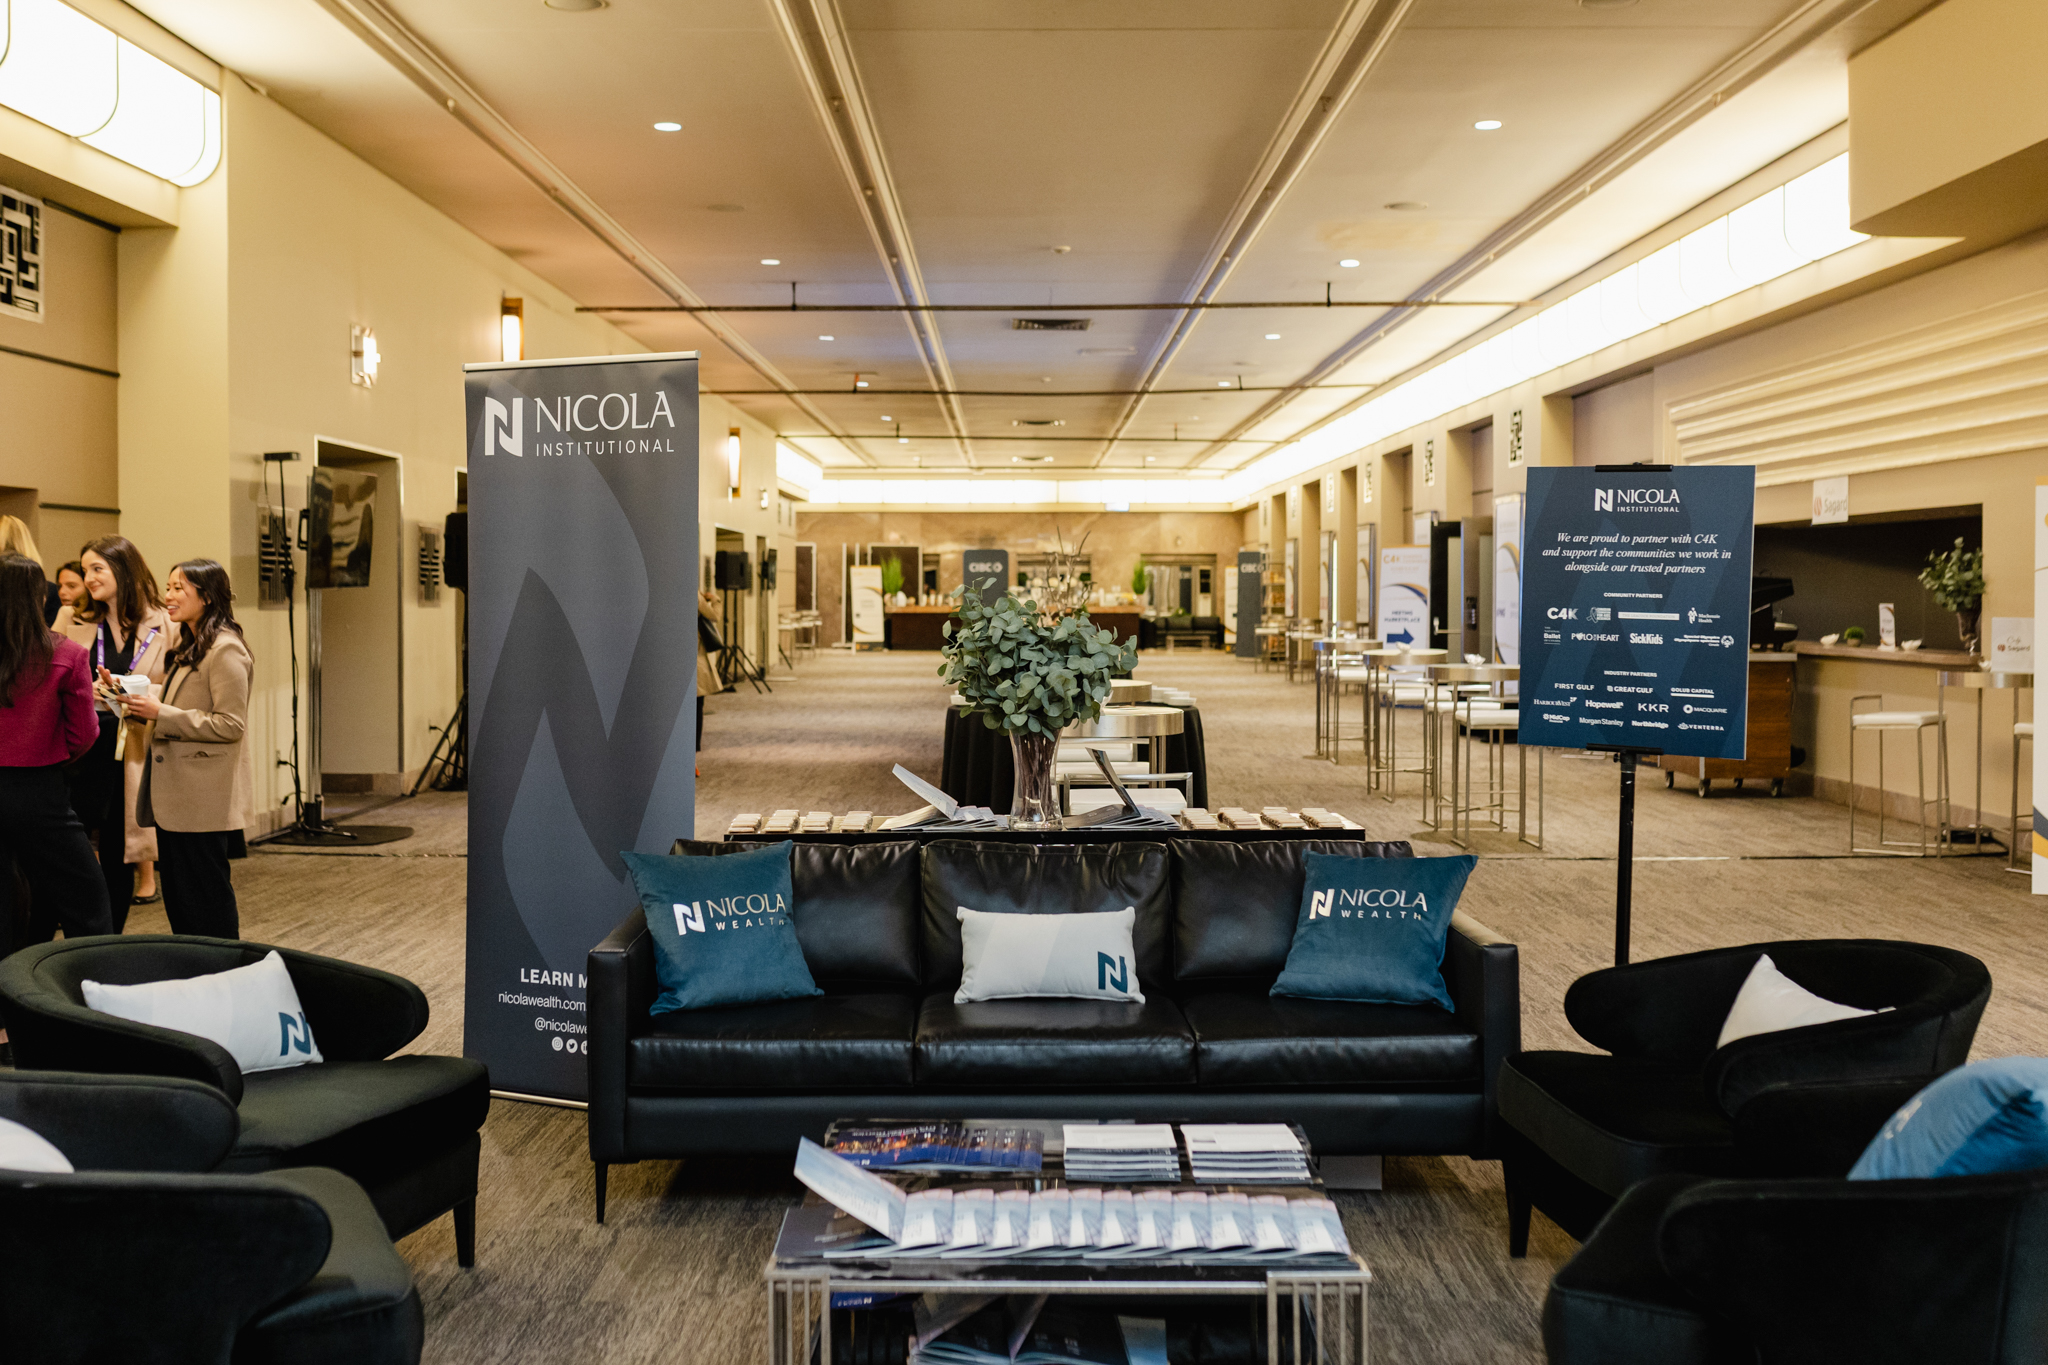 A lobby with conference-style seating arrangements, including comfortable couches and sleek tables.